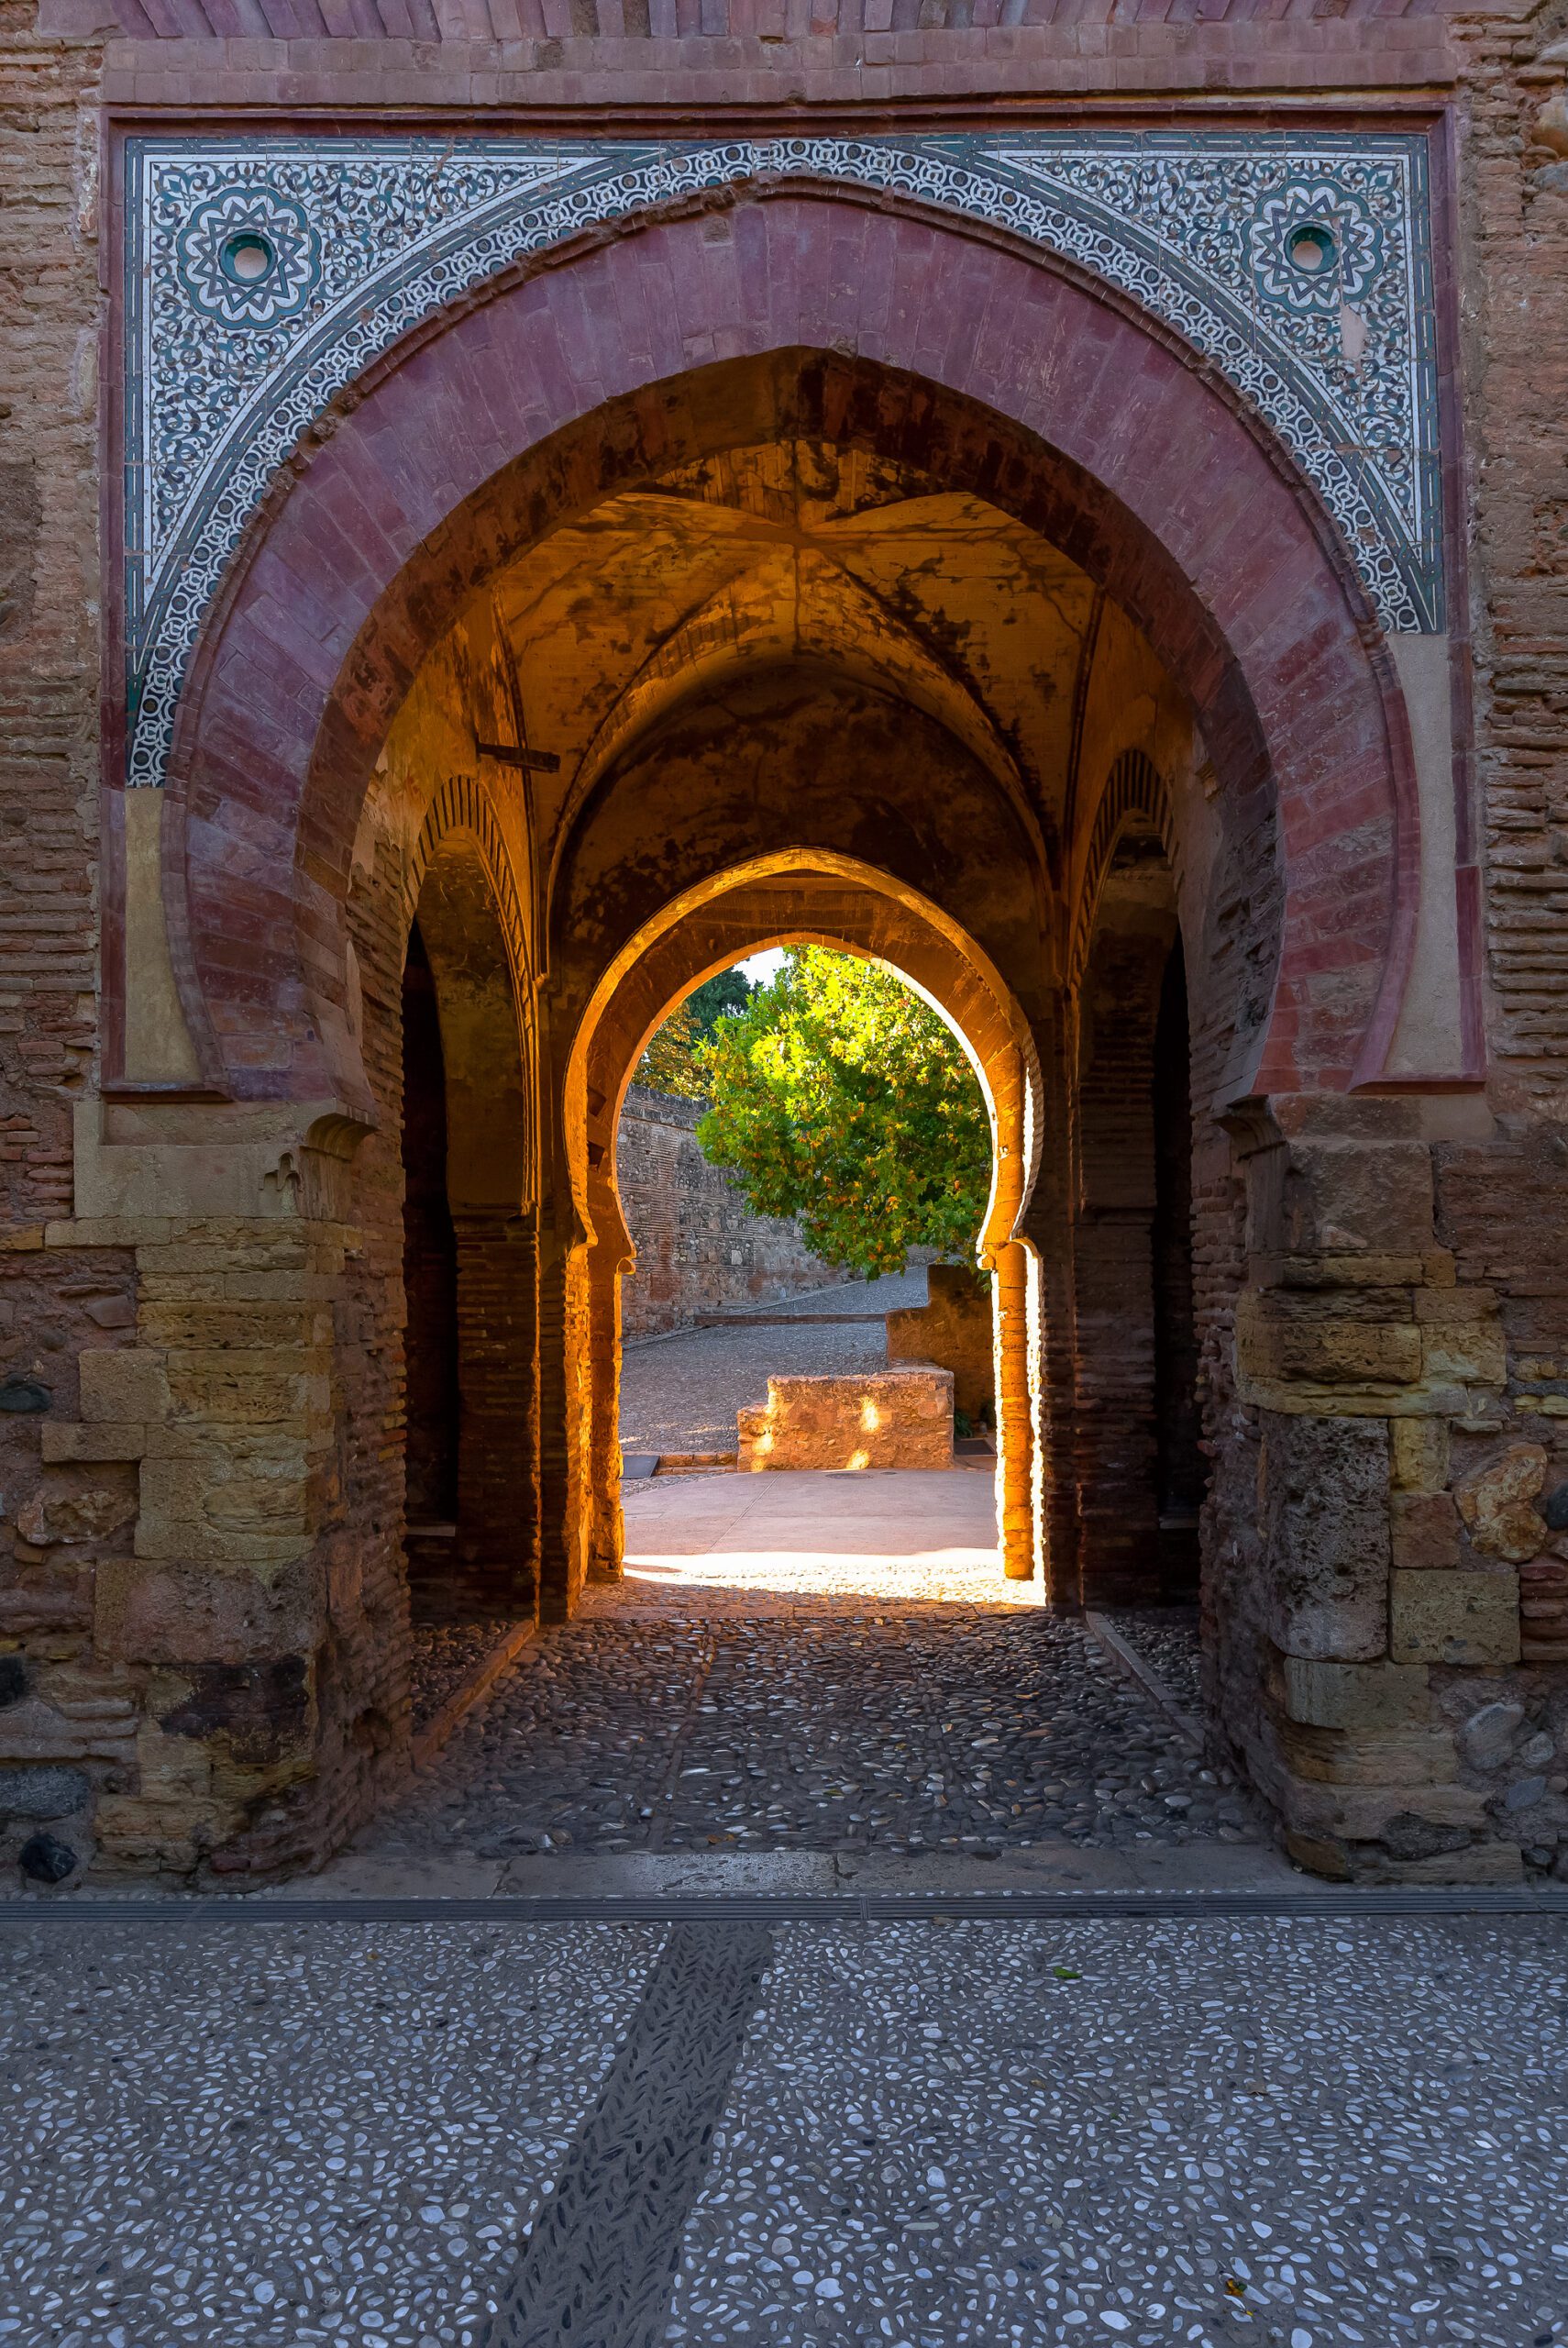 Image of an archway in the ancient Alhambra complex, showcasing detailed architectural designs.